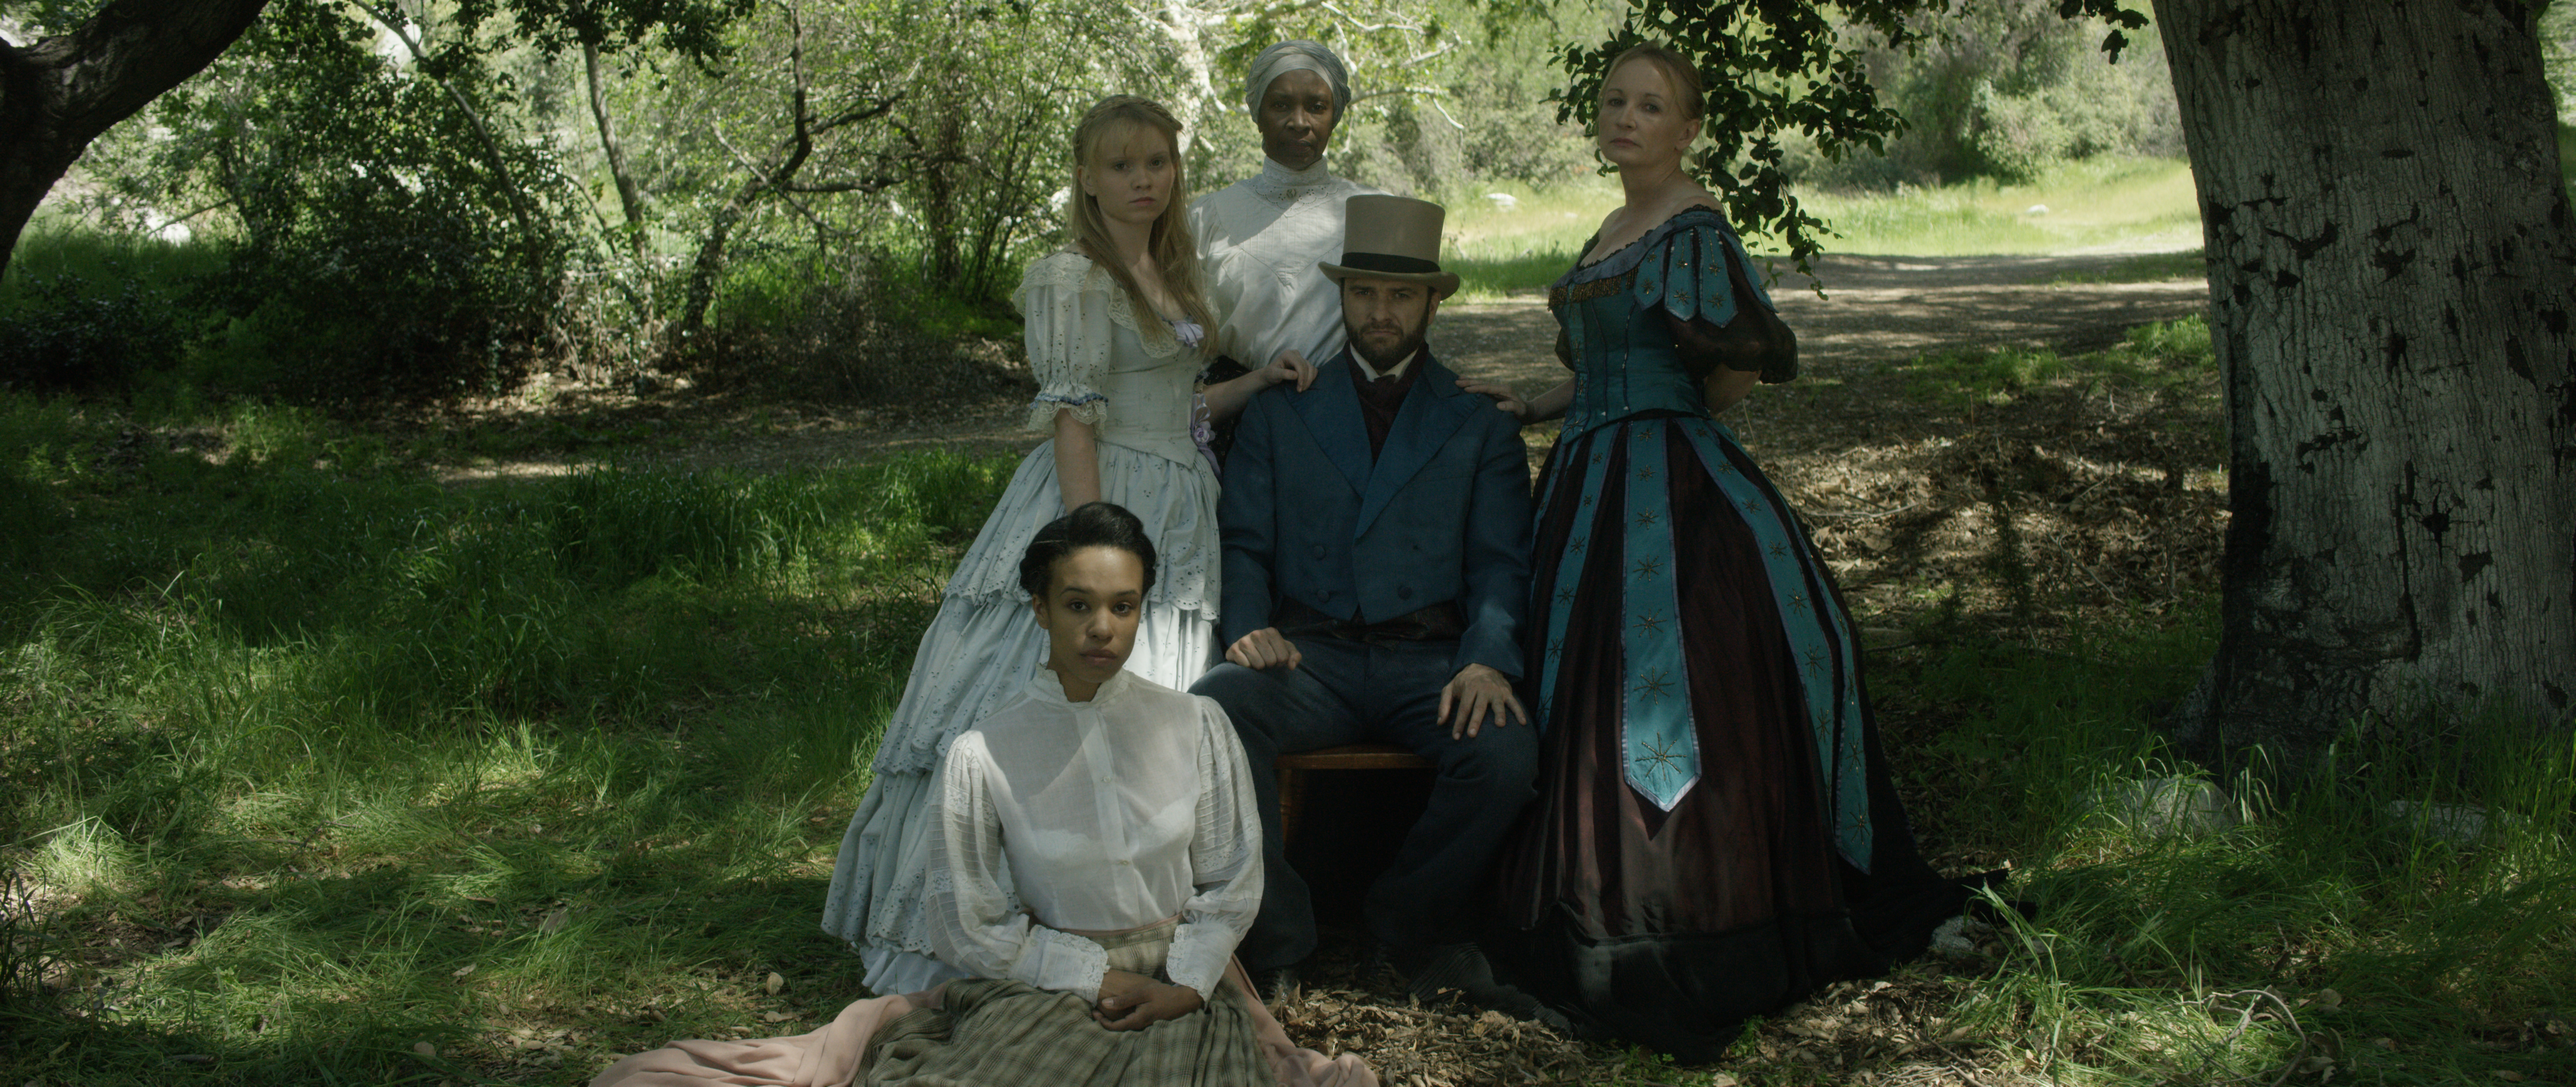 On the set of Verona in the San Gabriel Mountains. Family portrait.